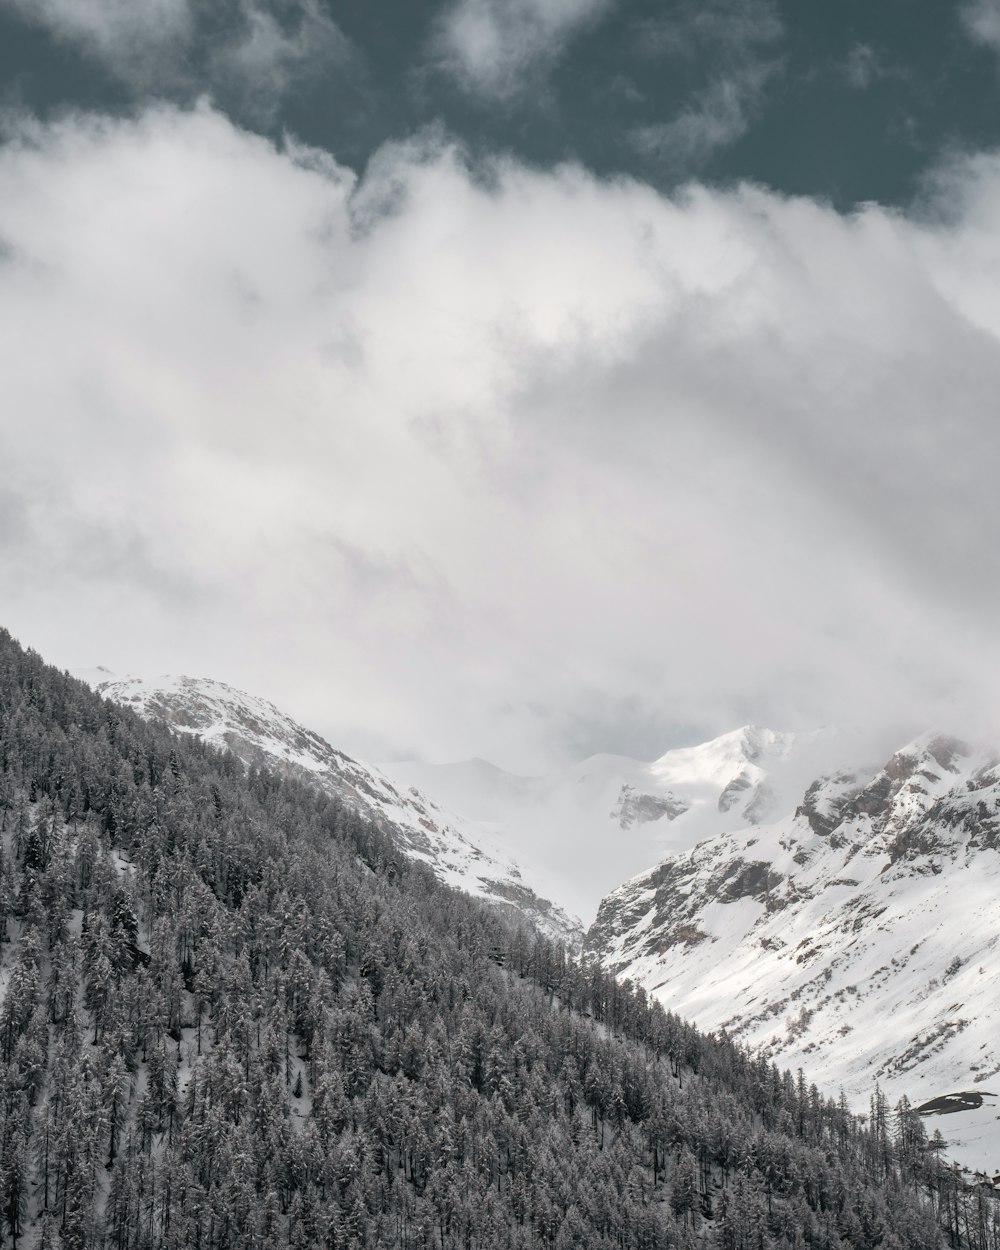 snow covered mountain under cloudy sky during daytime